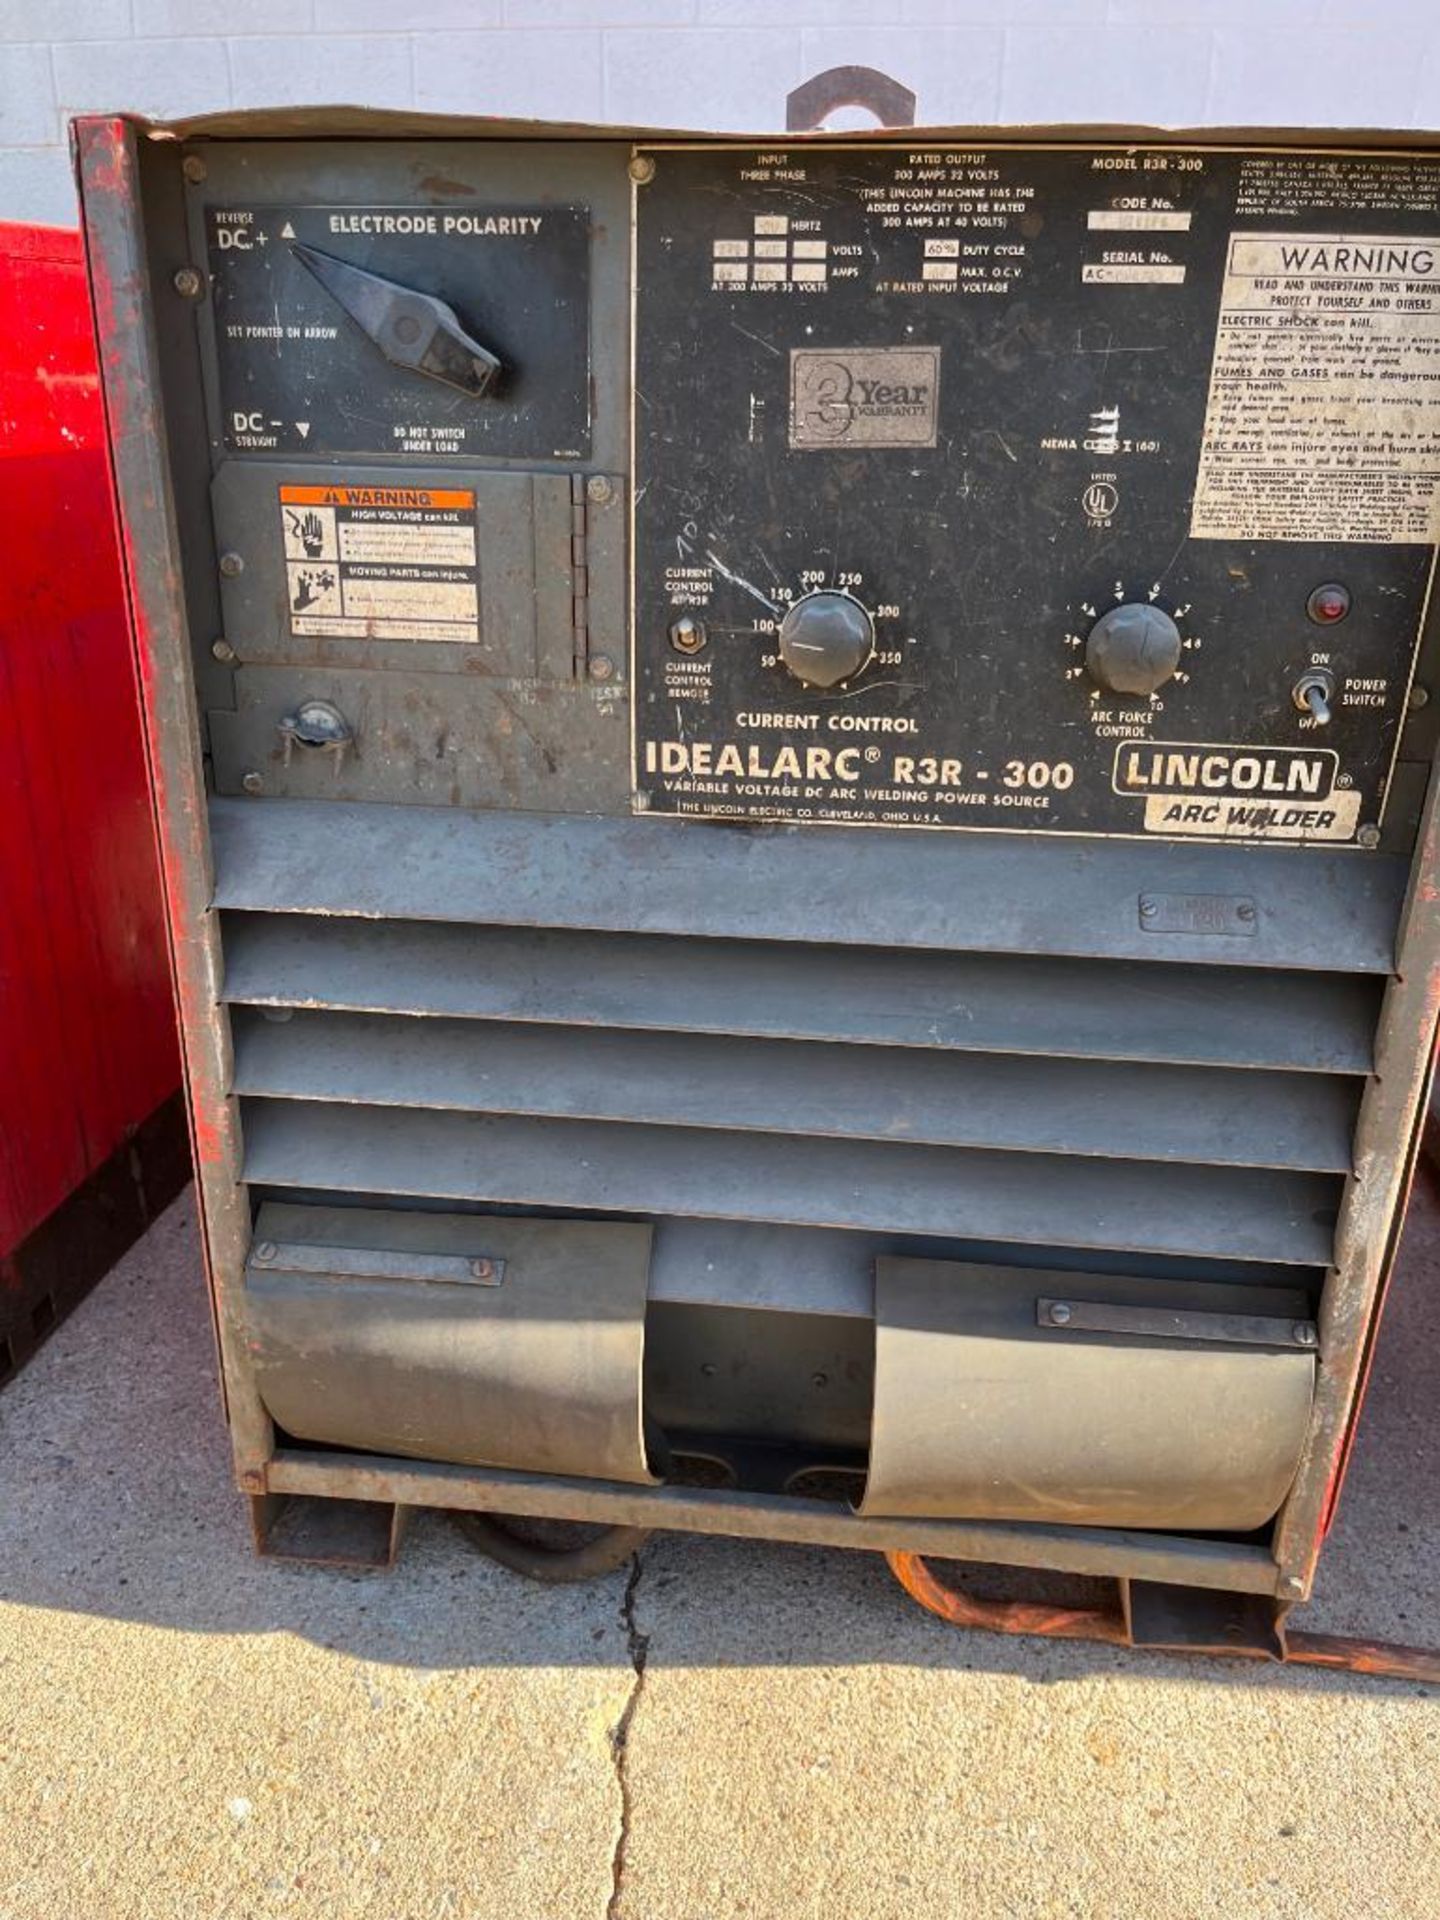 Lincoln Idealarc R3R-300 Variable Voltage DC ARC Welding Power Source - Image 2 of 3